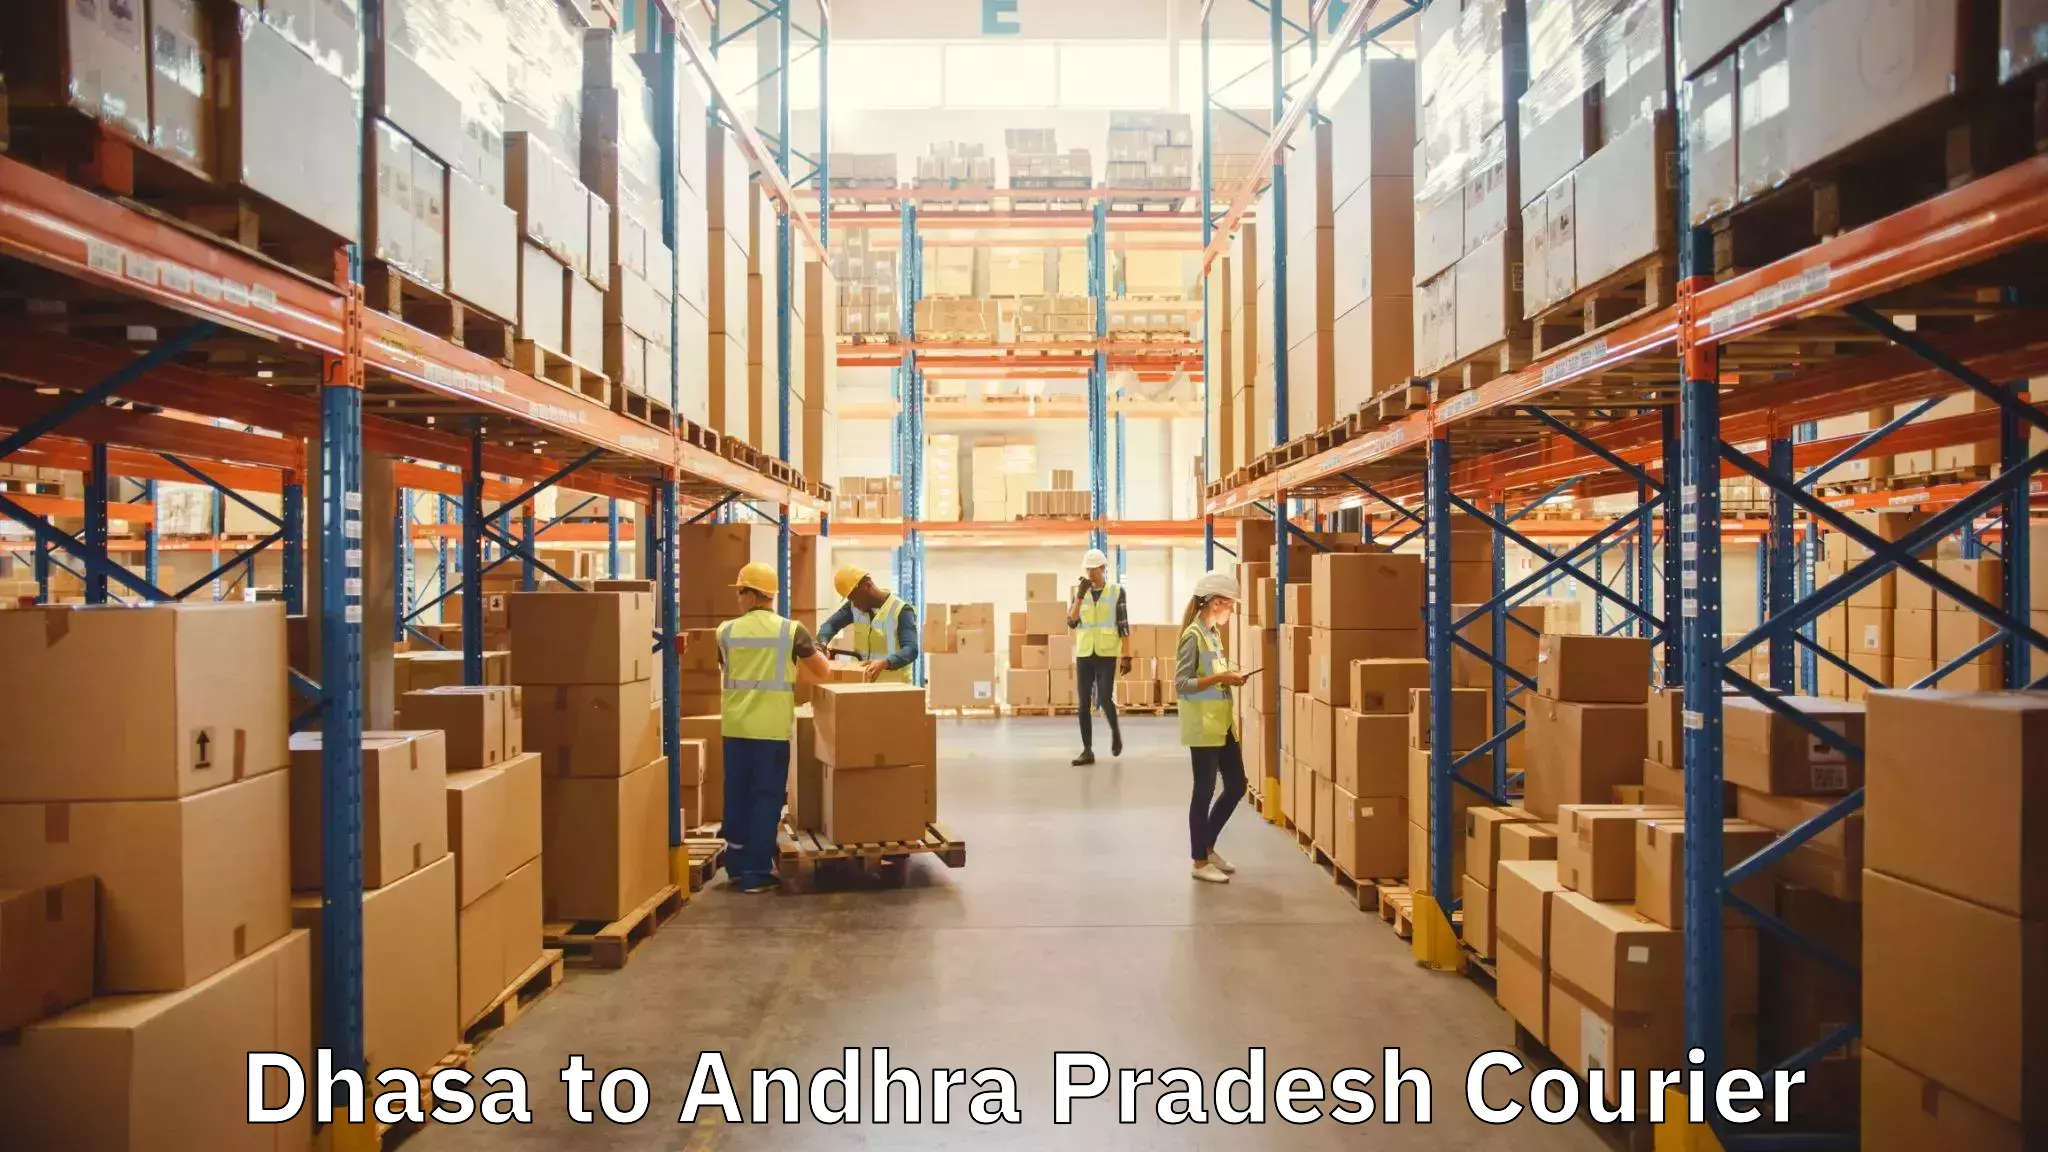 Dependable moving services Dhasa to Akividu